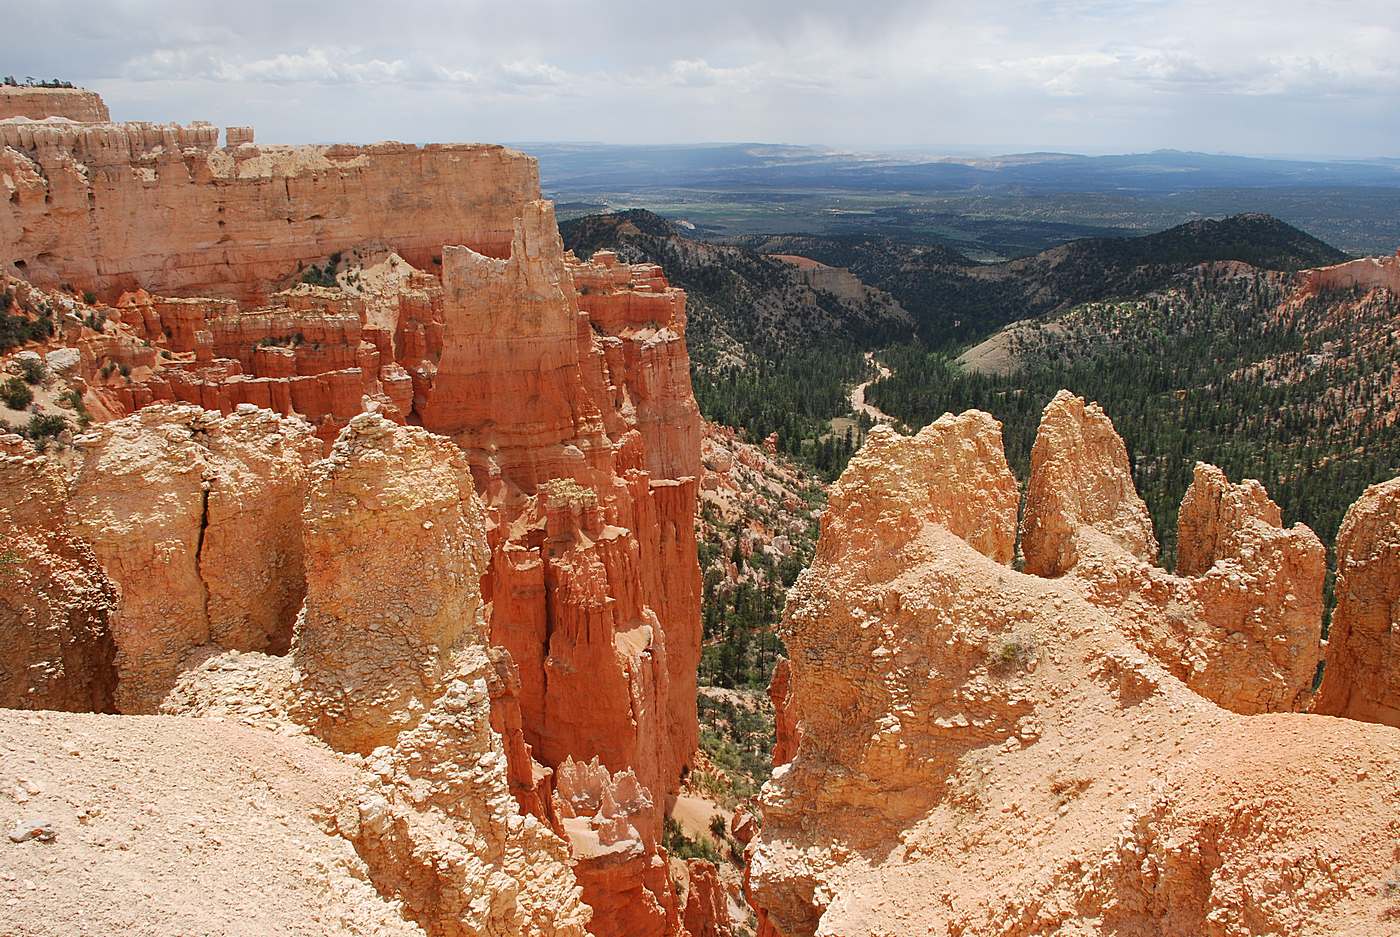 ON A CLEAR DAY IT IS SAID THAT YOU CAN SEE FOR MORE THAN A HUNDRED MILES FROM THE RIM OF BRYCE CANYON